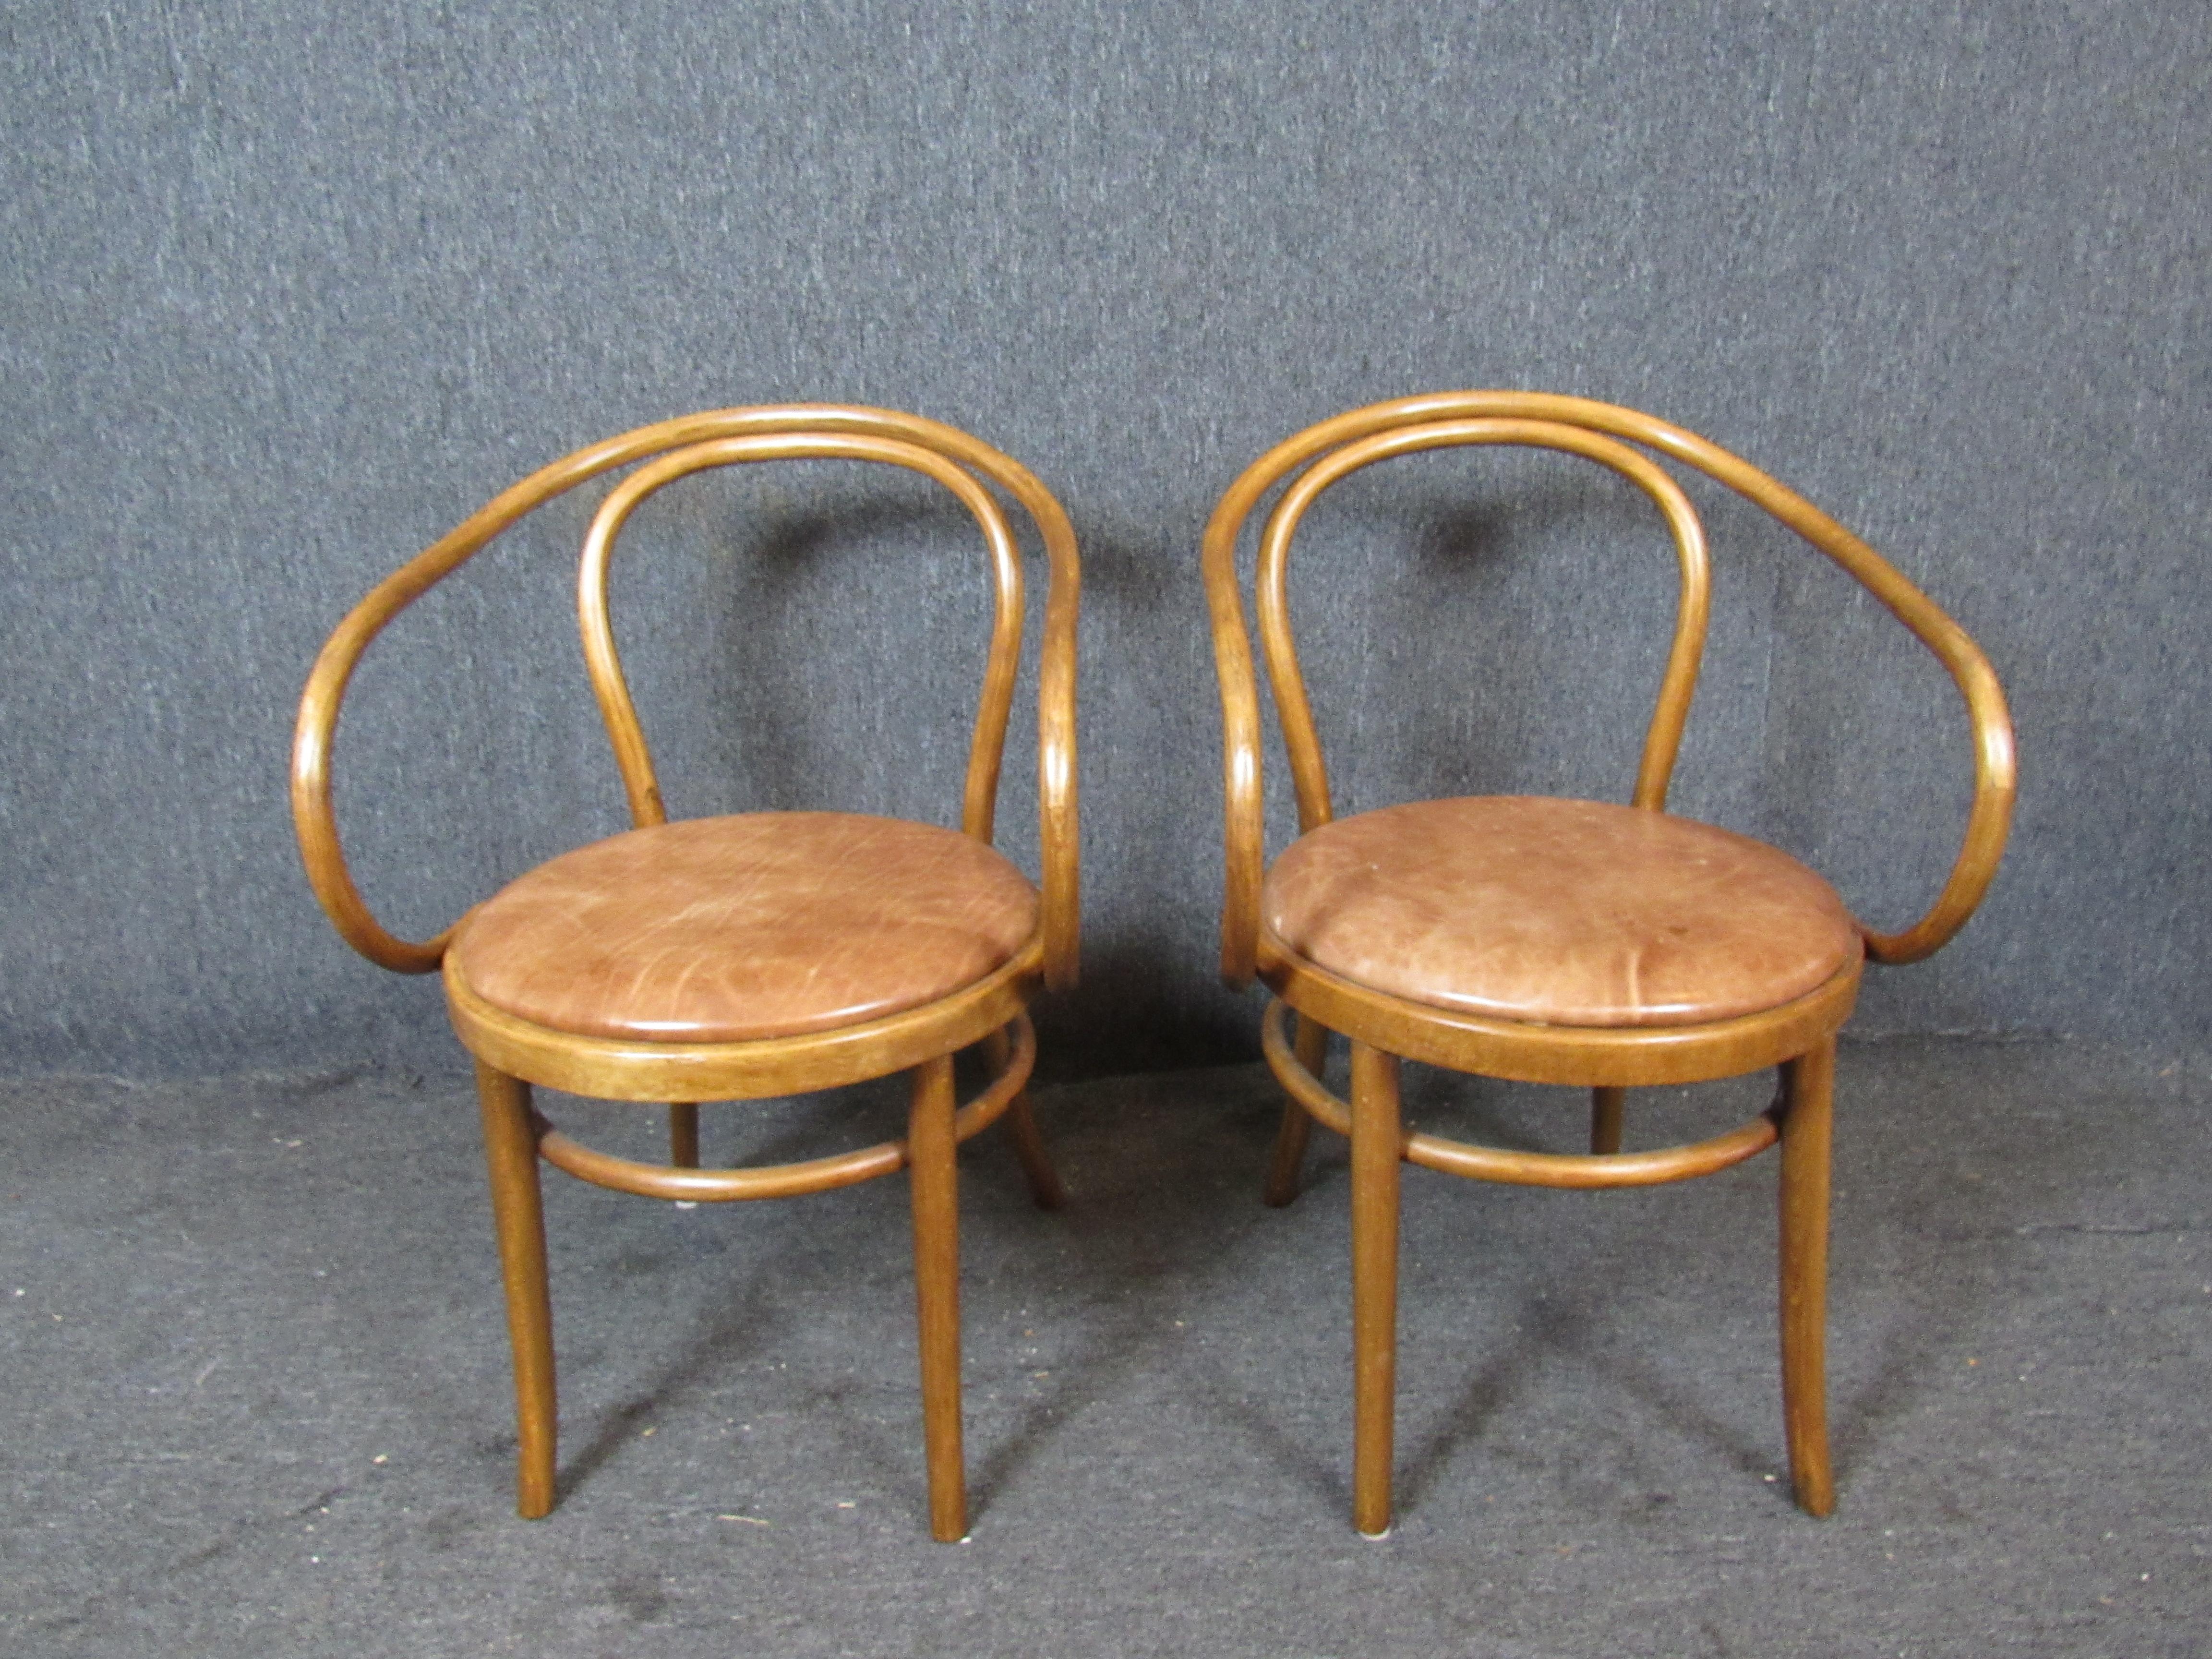 Terrific pair of bentwood dining chairs in the iconic Thonet design. Genuine craftsmanship provides study support that is sure to last for years to come. Beautiful wood grain and complimentary leather seats are sure to compliment a wide array of